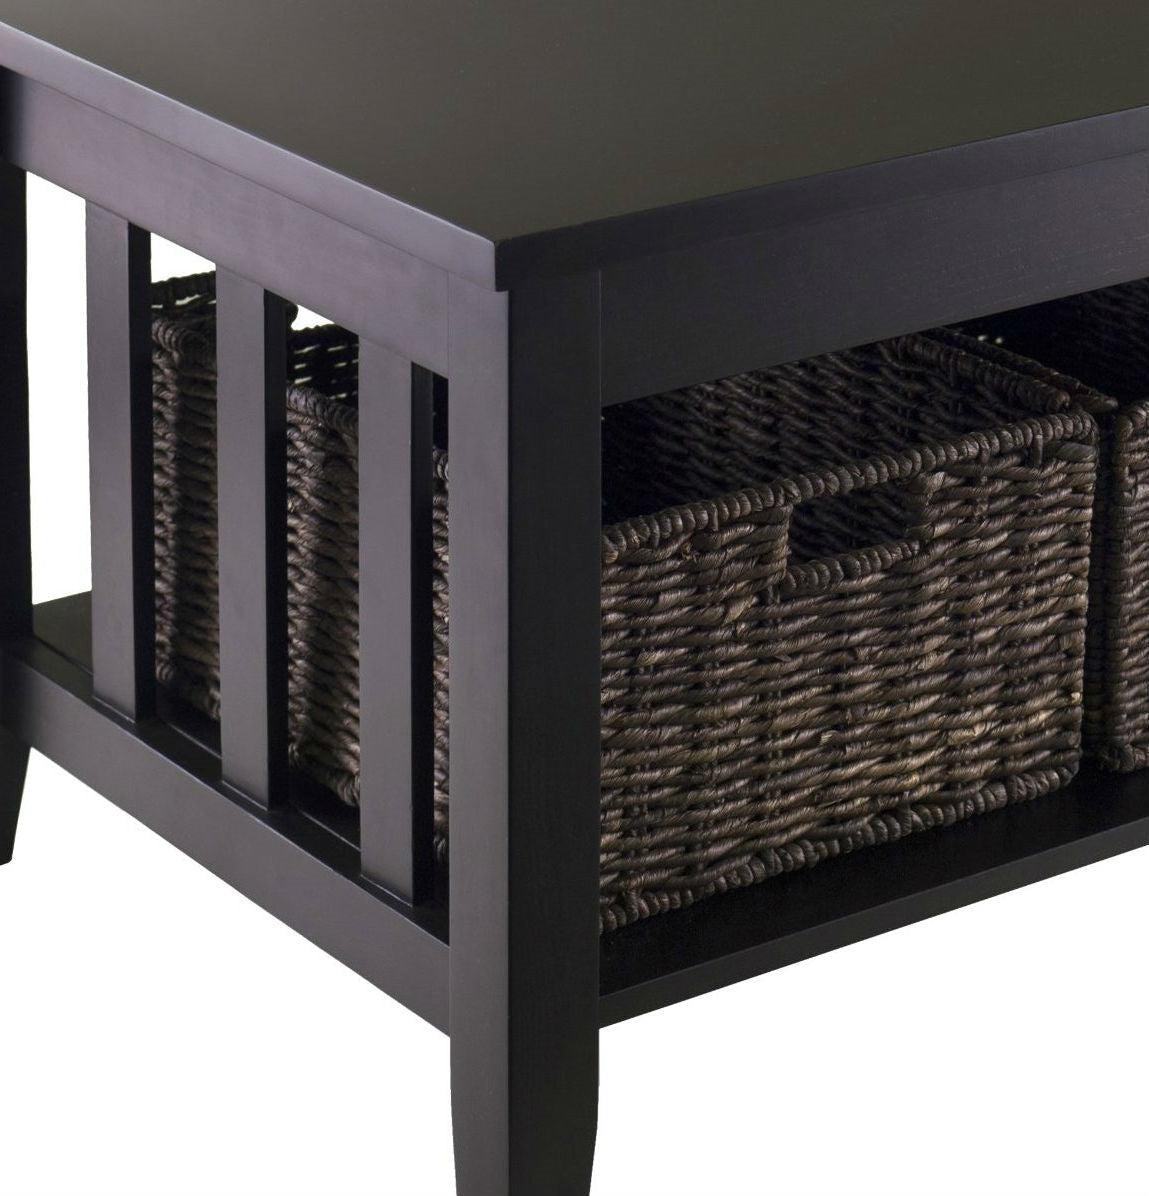 Living Room > Bookcases - Espresso 2 Tier Coffee Occasional Table With 3 Storage Baskets